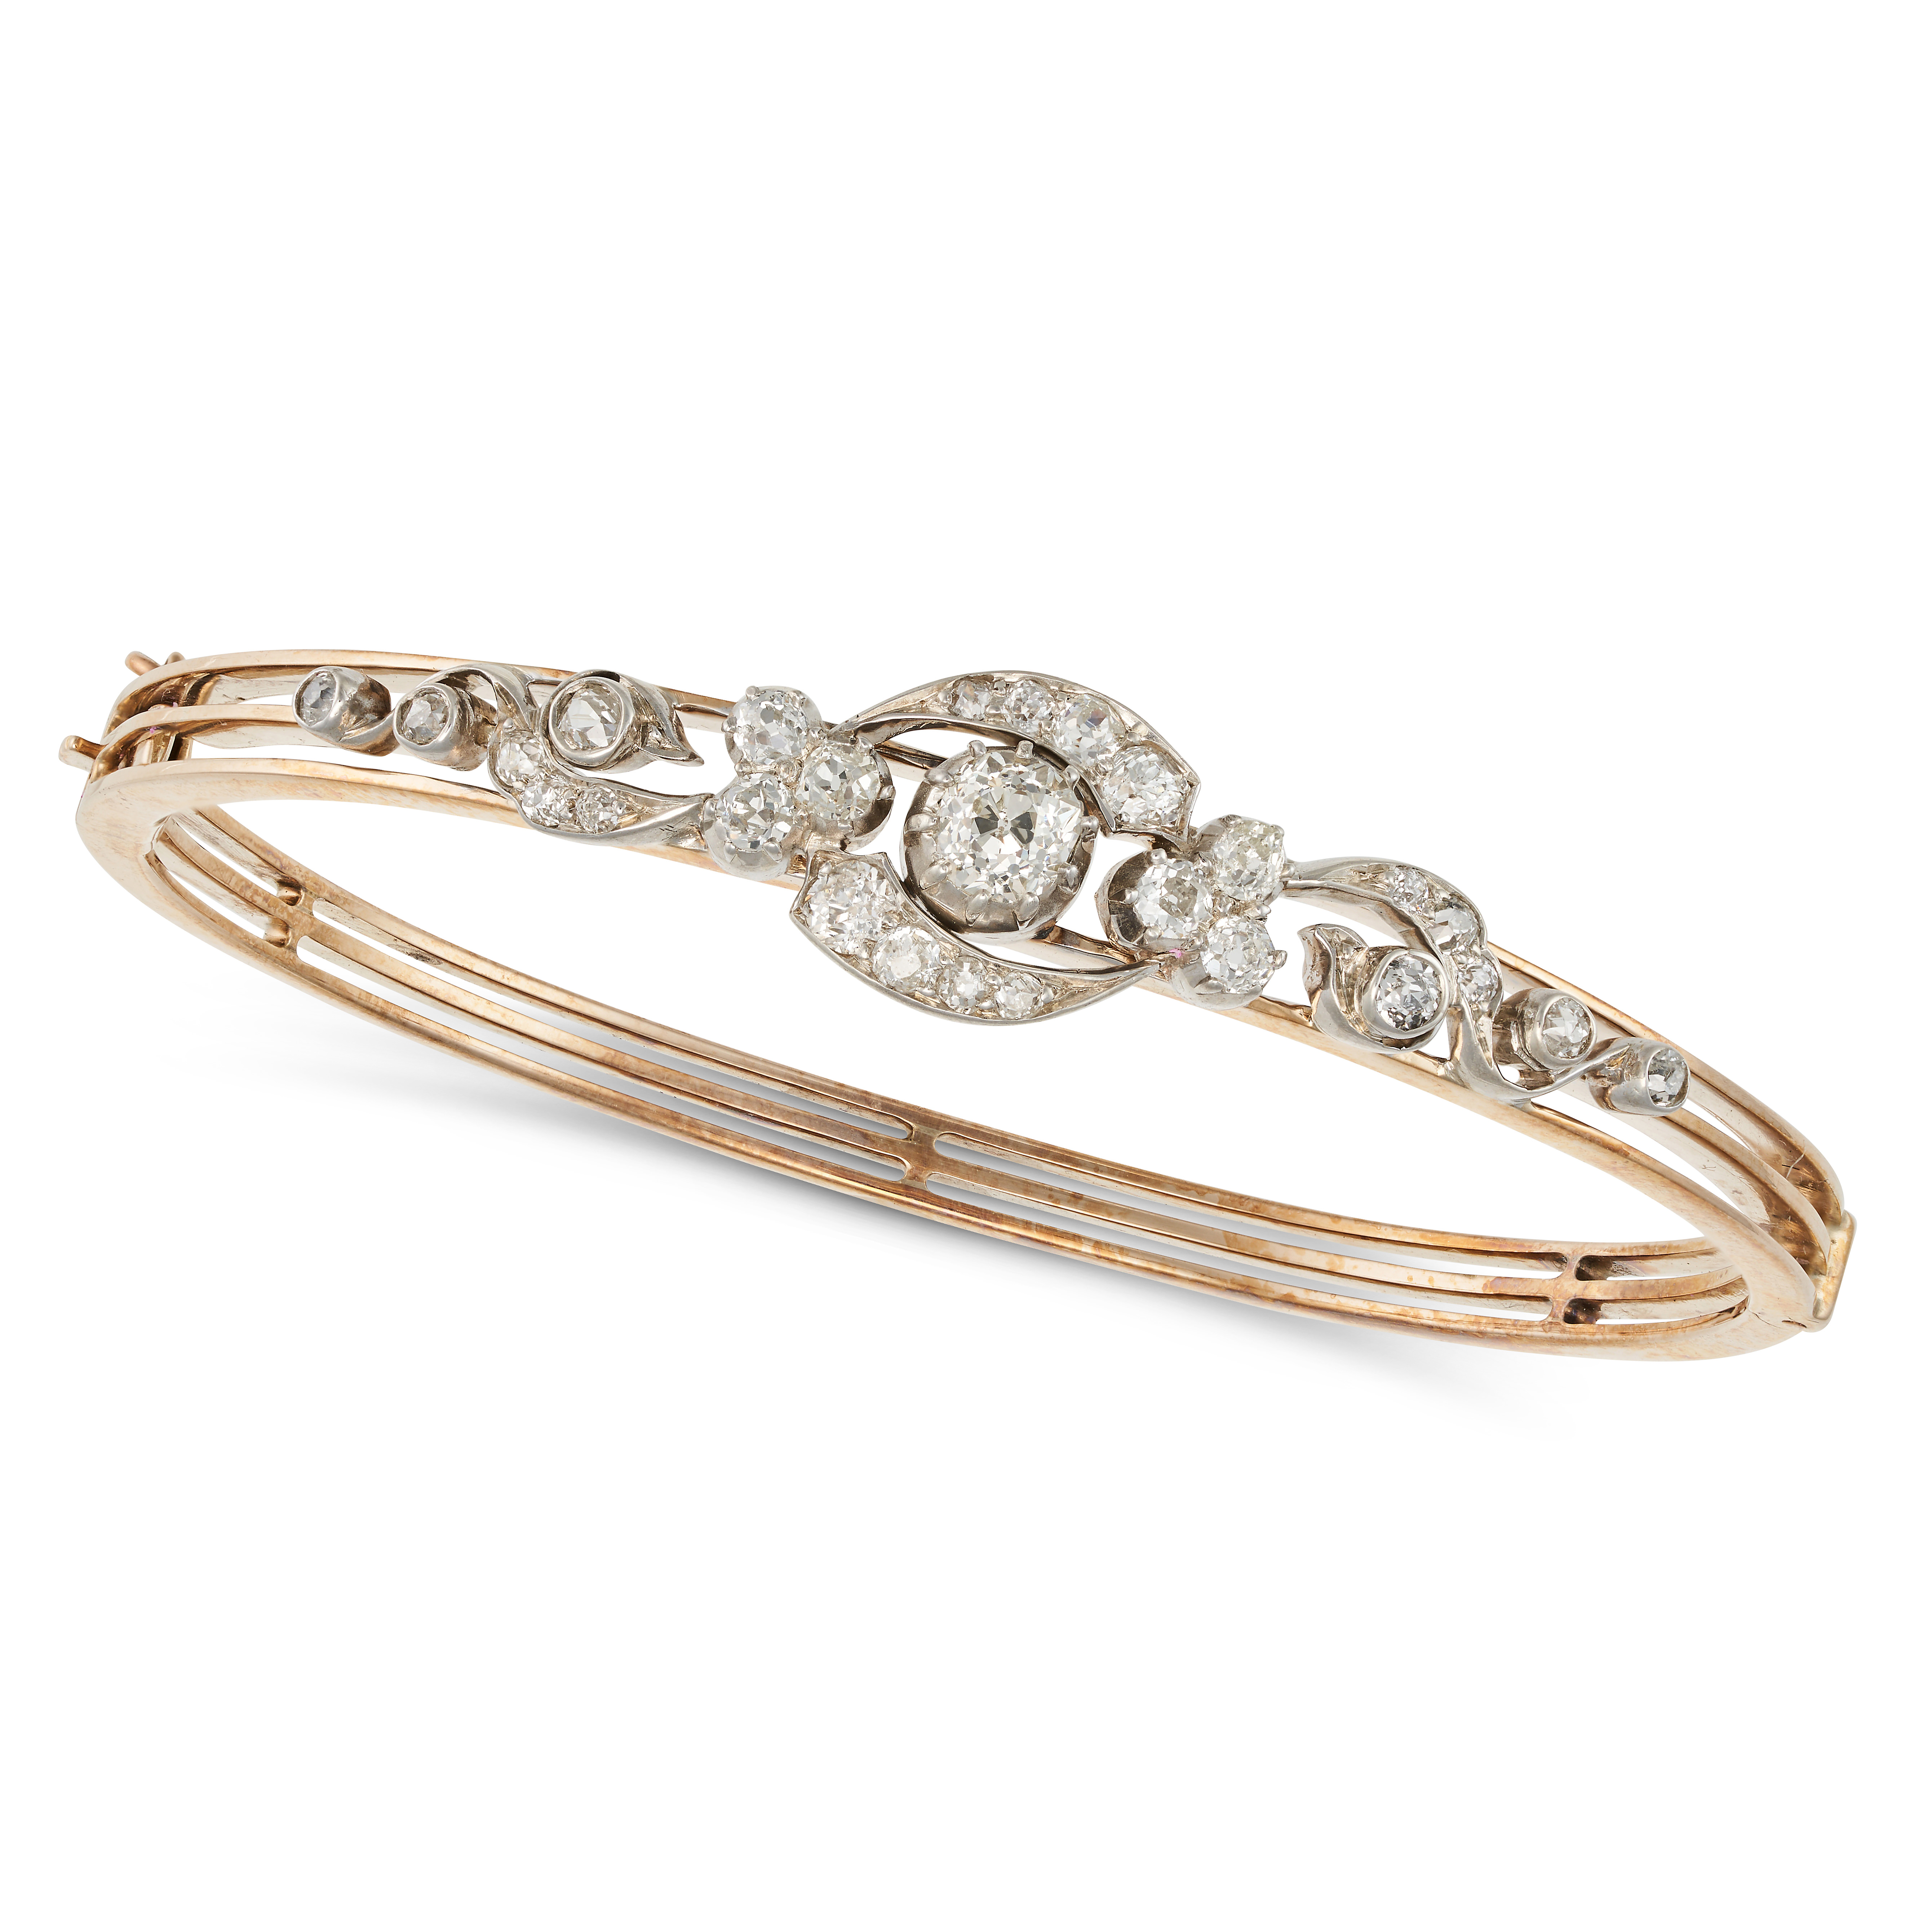 AN ANTIQUE VICTORIAN DIAMOND BANGLE in yellow gold, in a scrolling design set throughout with old...